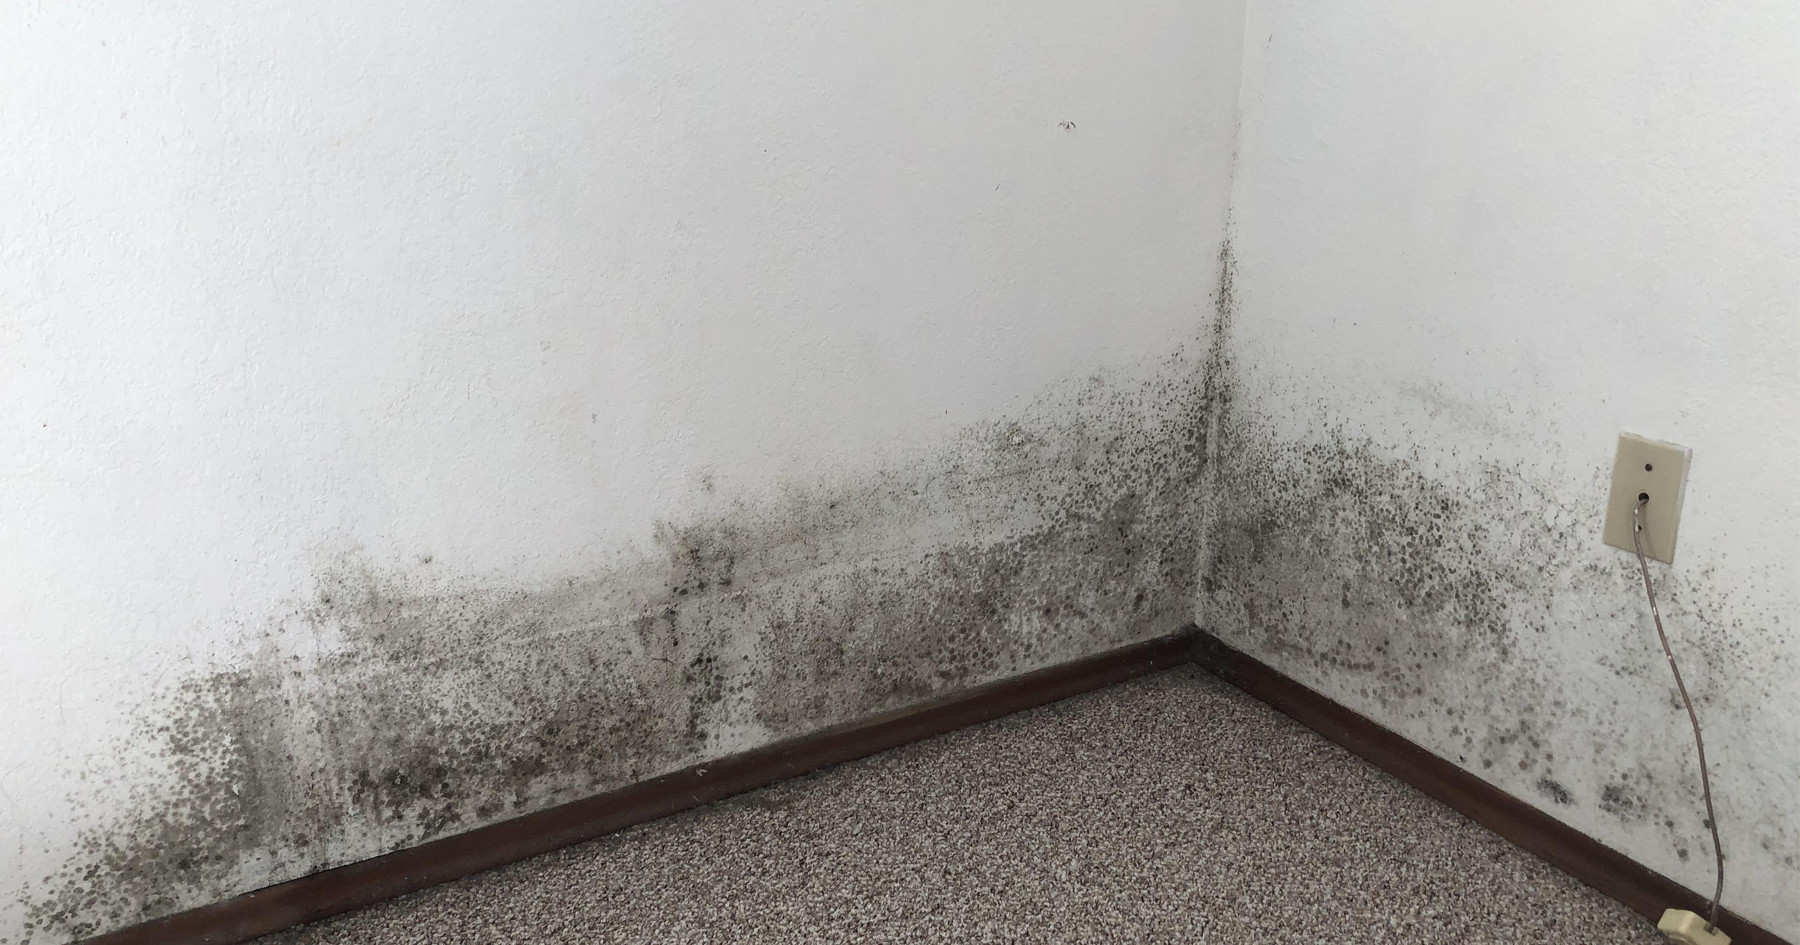 A room with mold on the wall and floor.